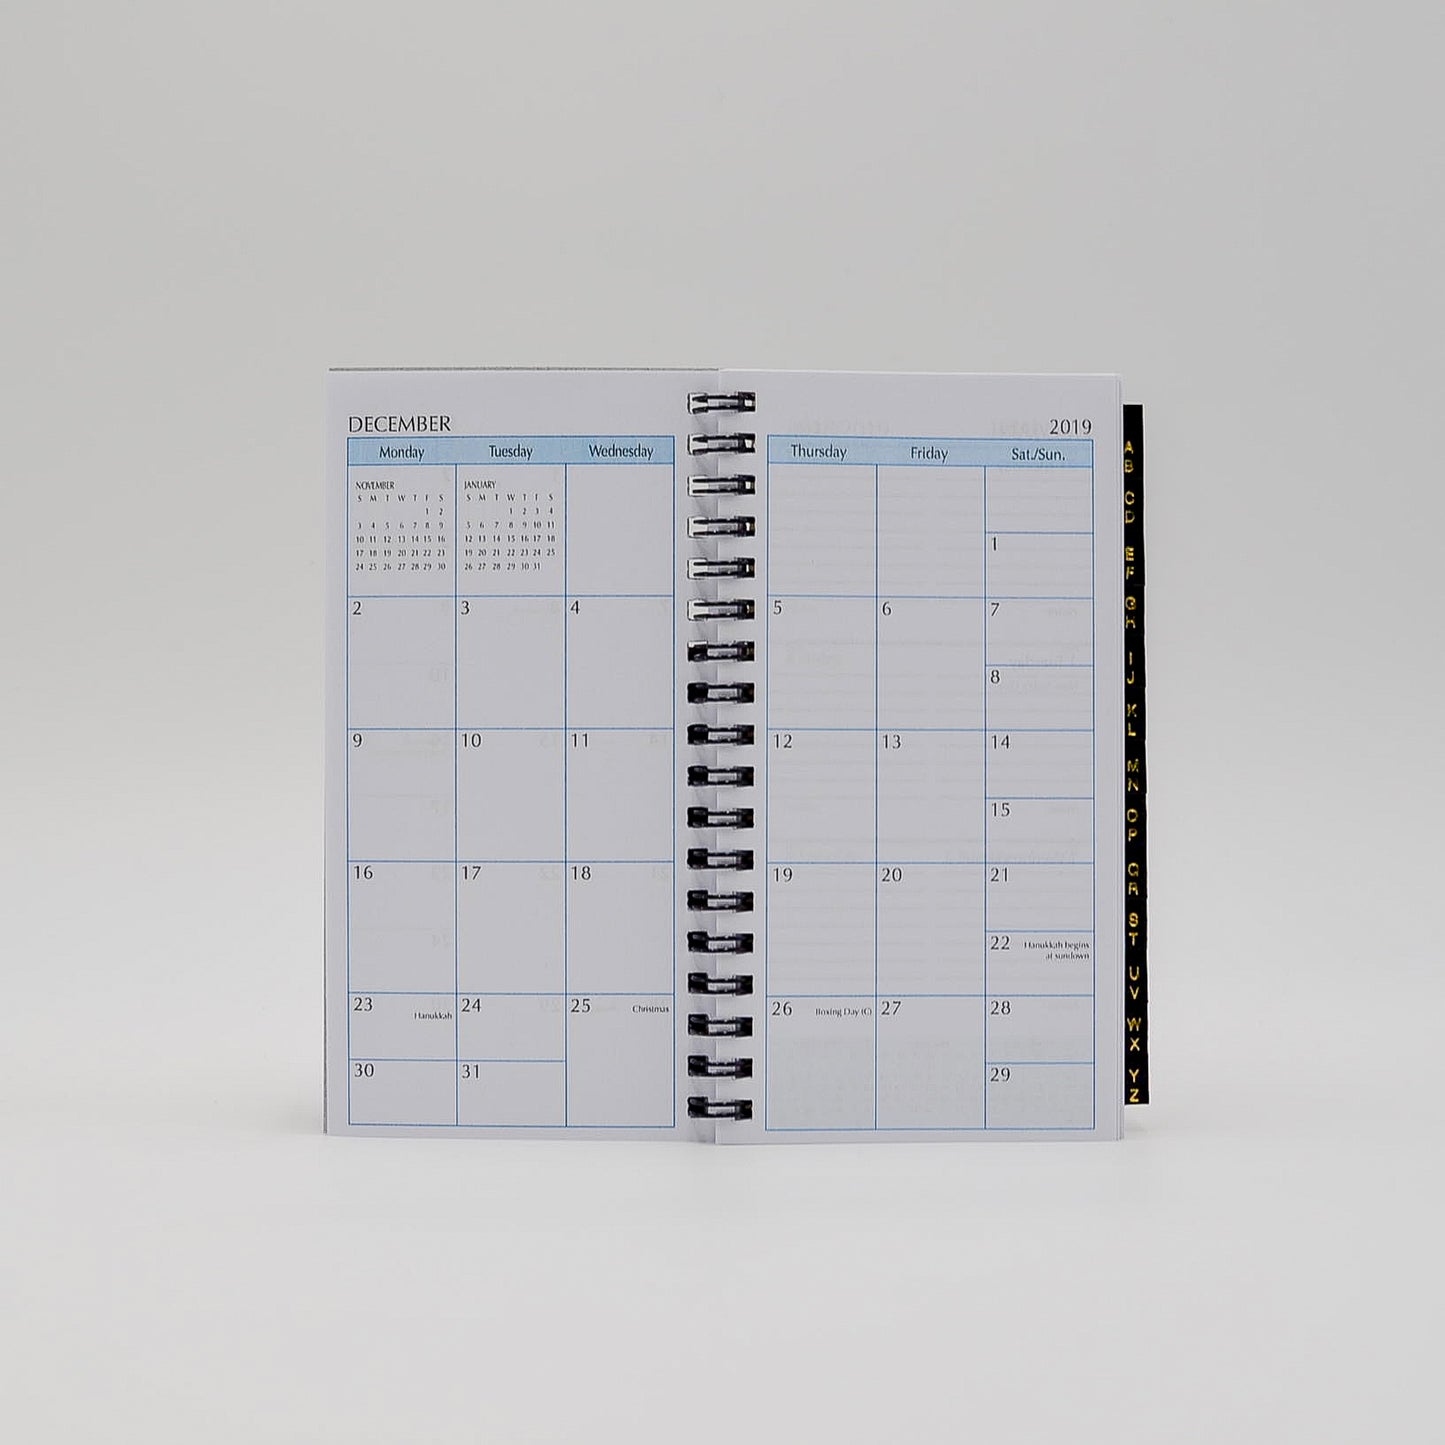 McCarthy Collection MWA36W 6-1/4 x 3-1/4 Wirebound Address/Planner Combo calendar refill 2019 2020 spiral diary monthly weekly planning 